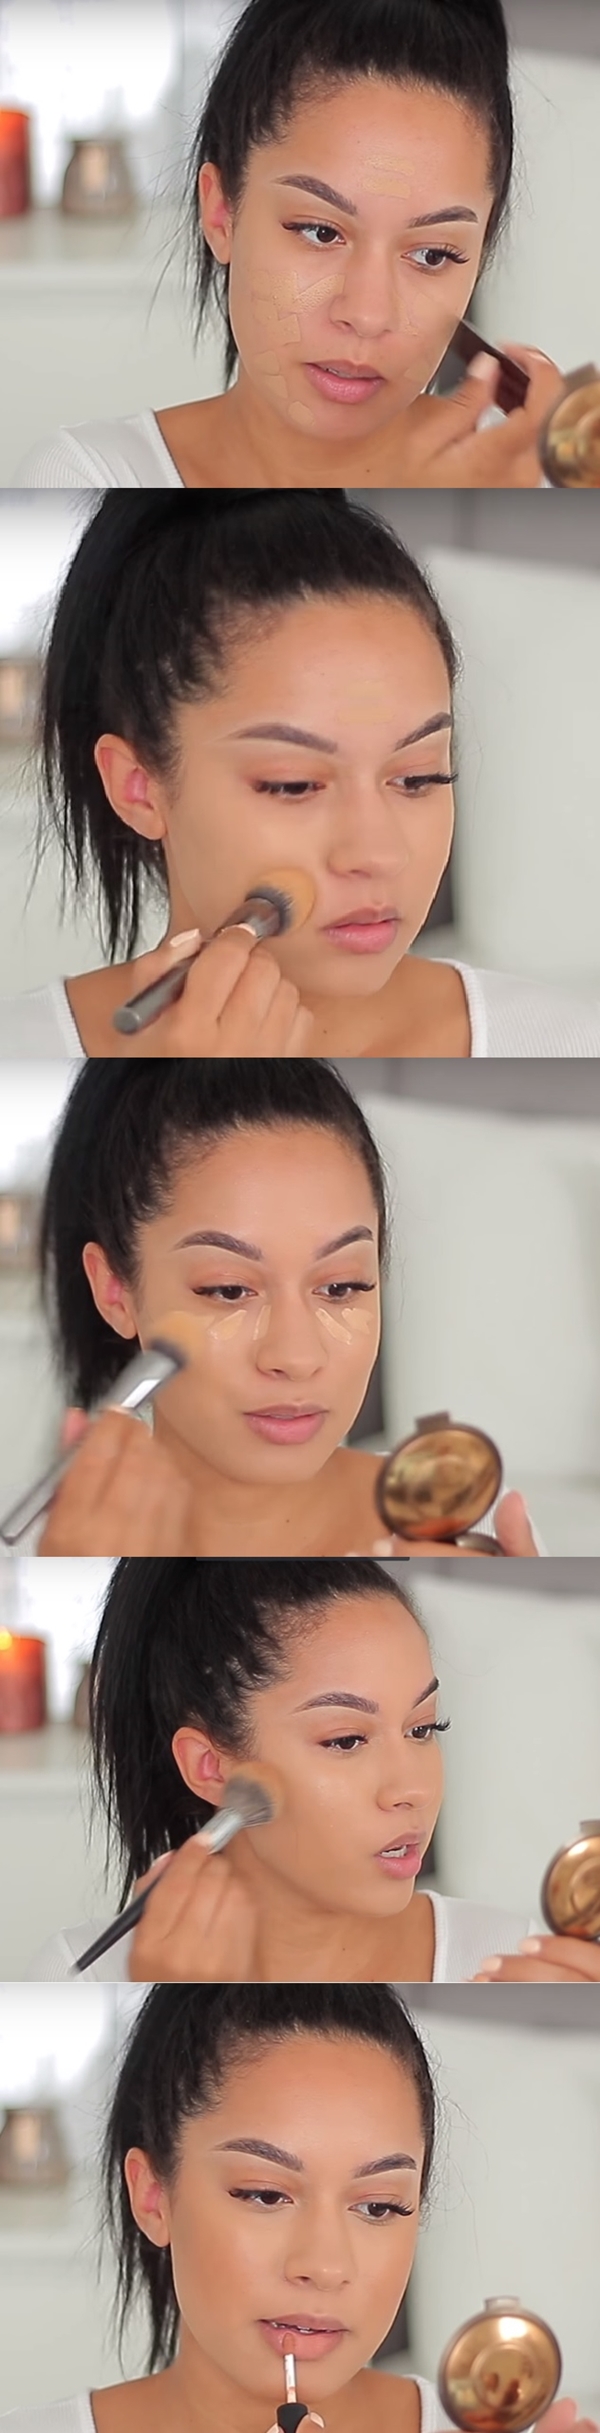 Six-Minutes-Makeup-Guides-For-Working-Women.